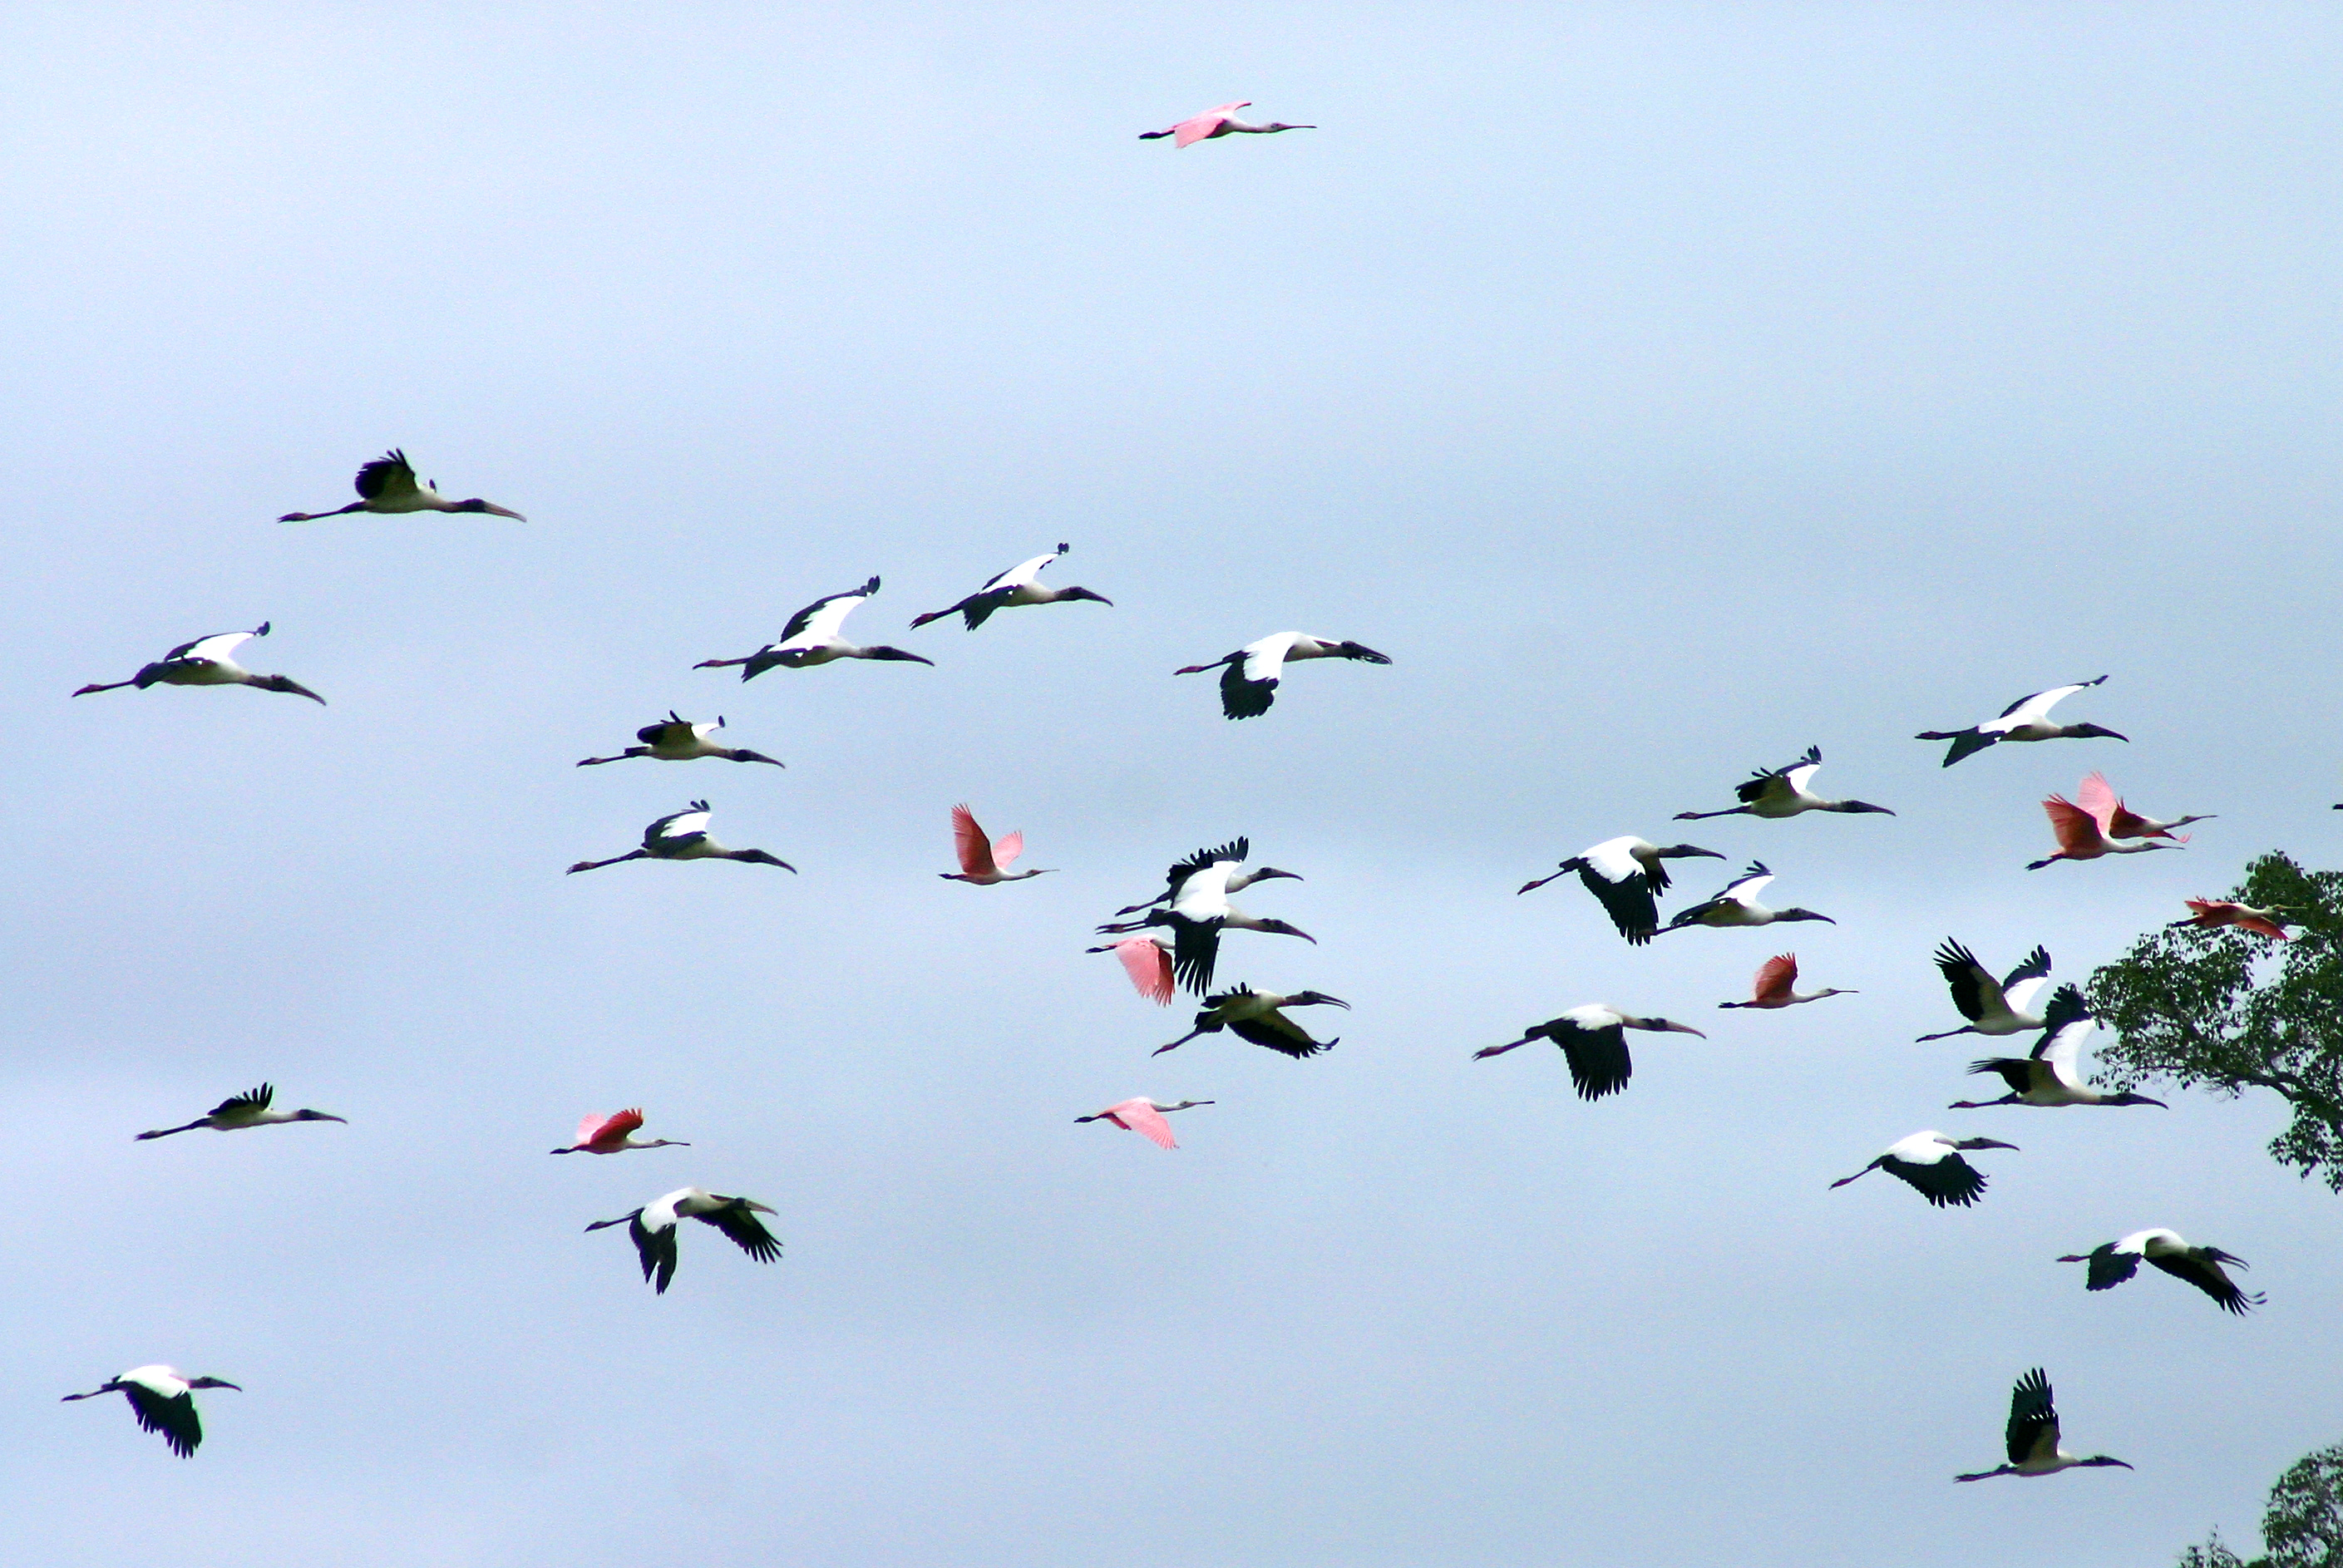 Large groups of different kinds of birds